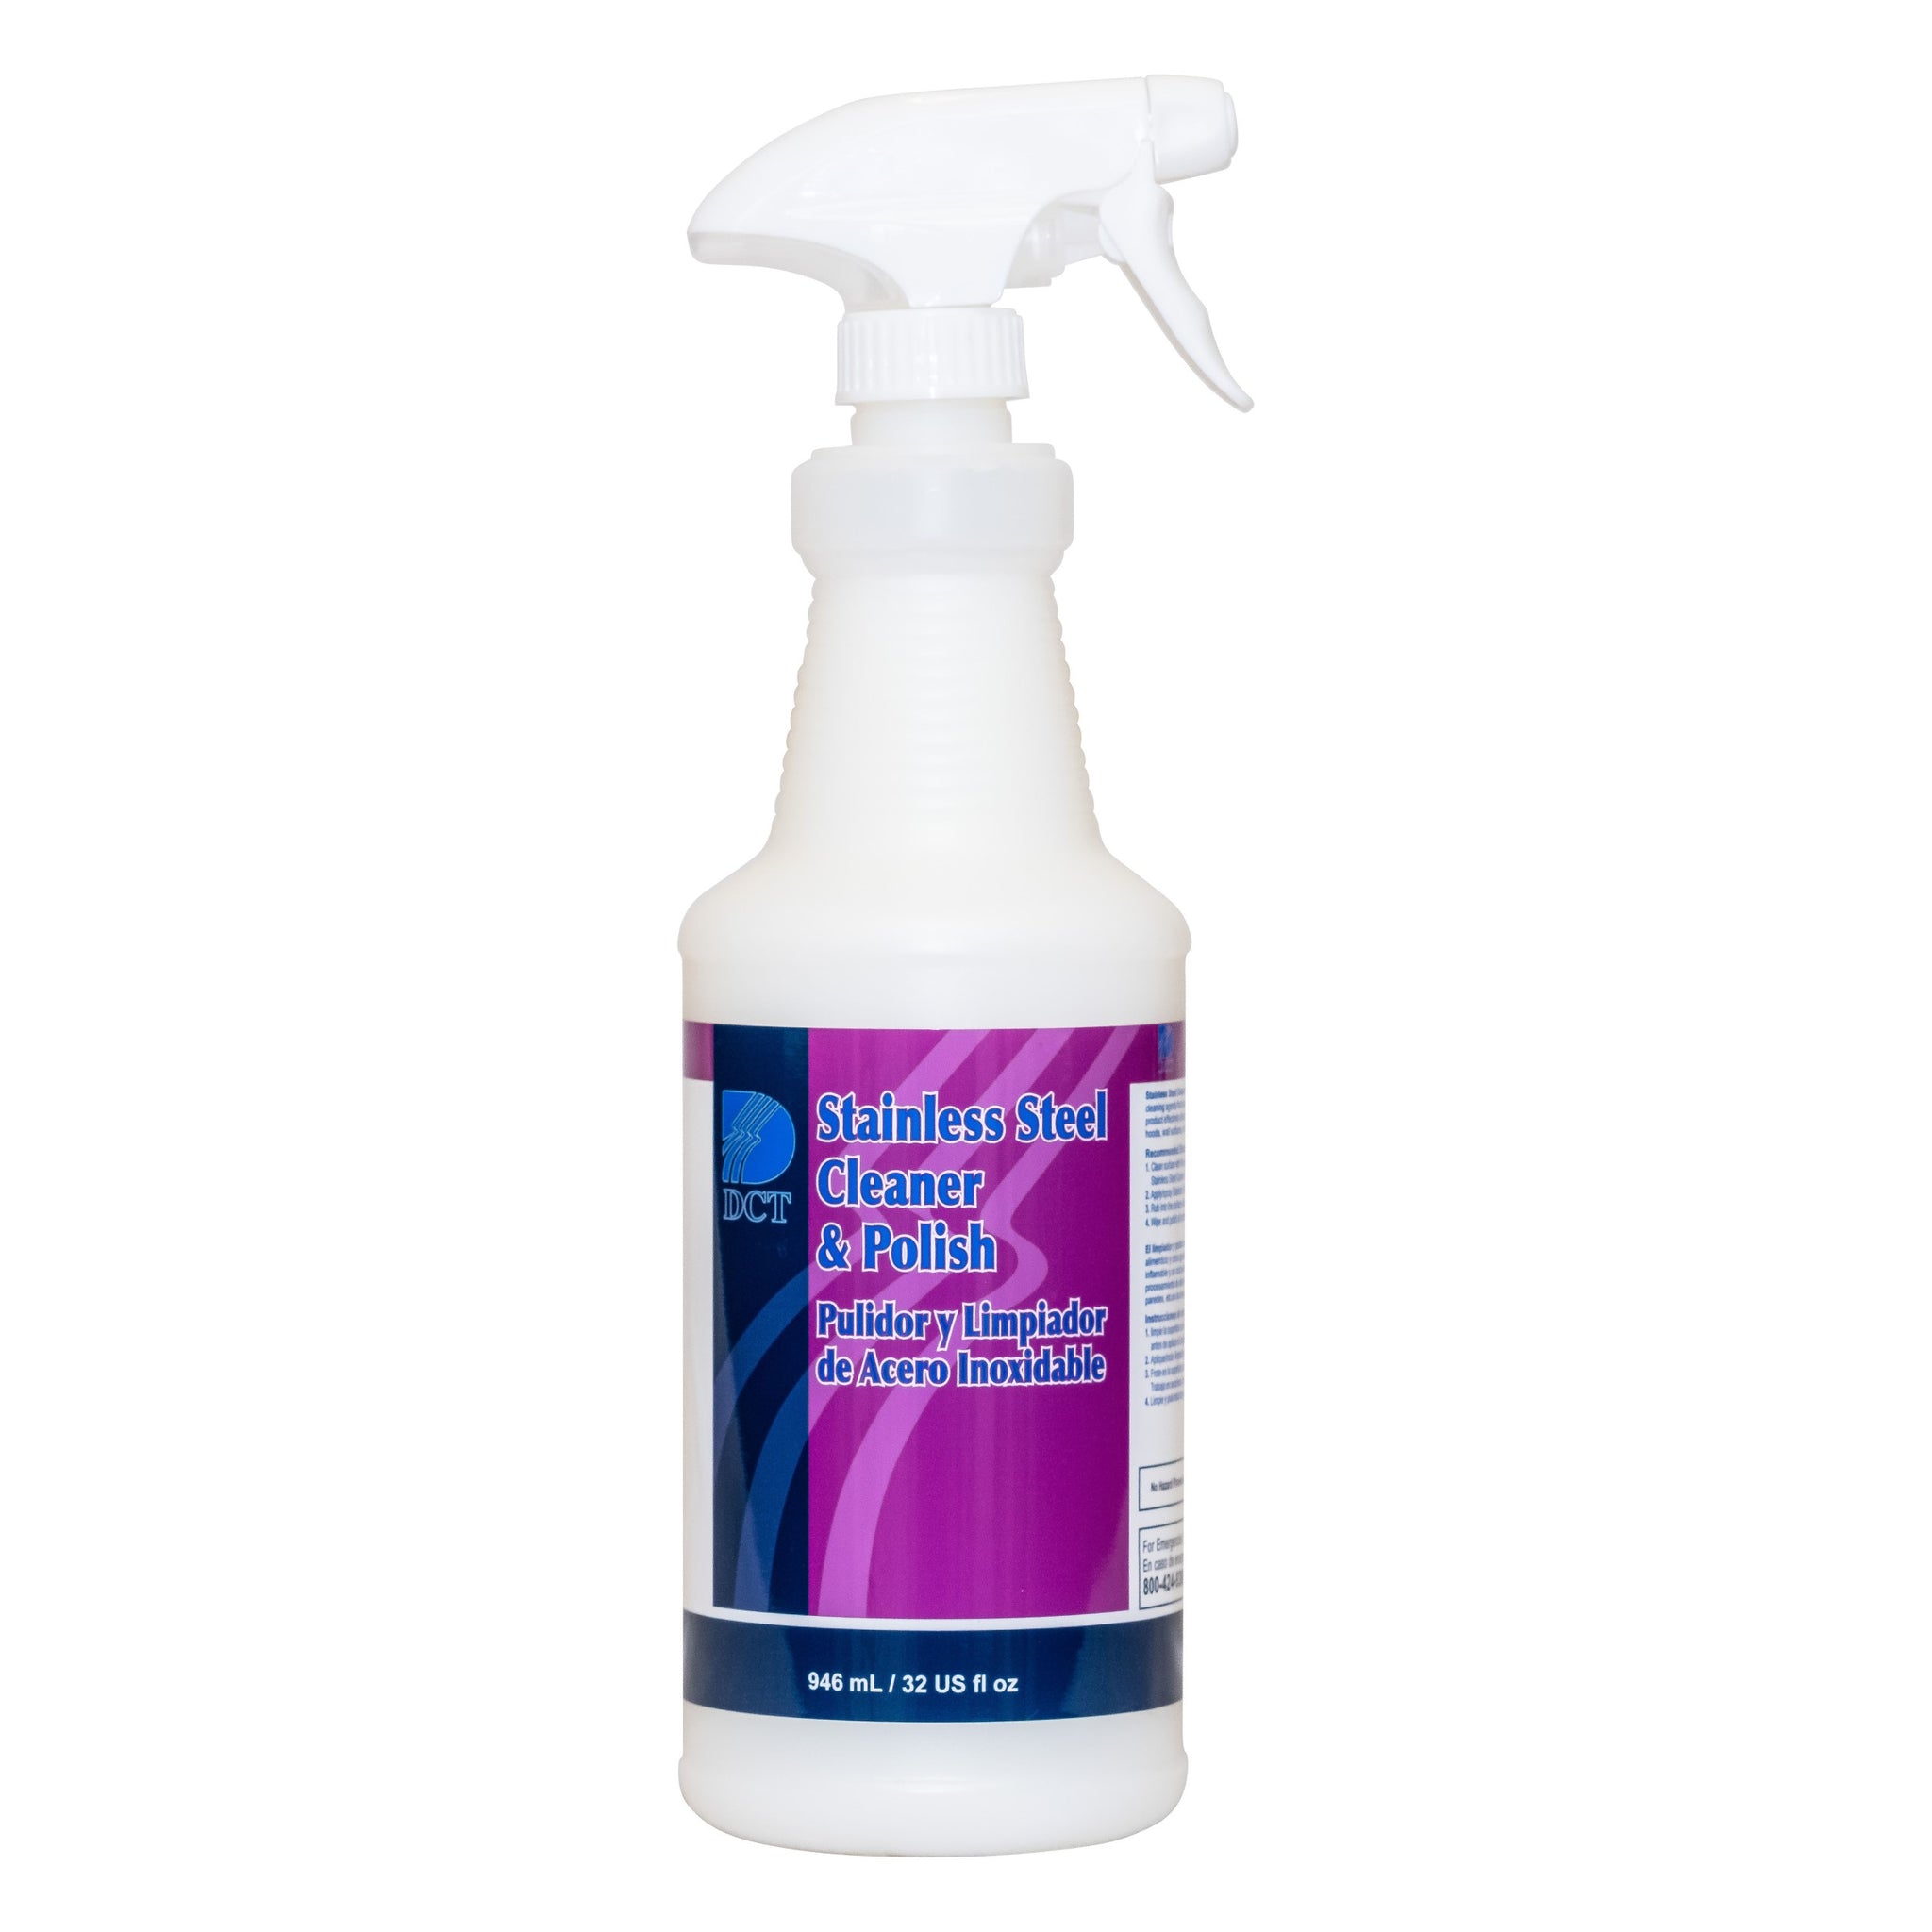 Stainless Steel Cleaner & Polish